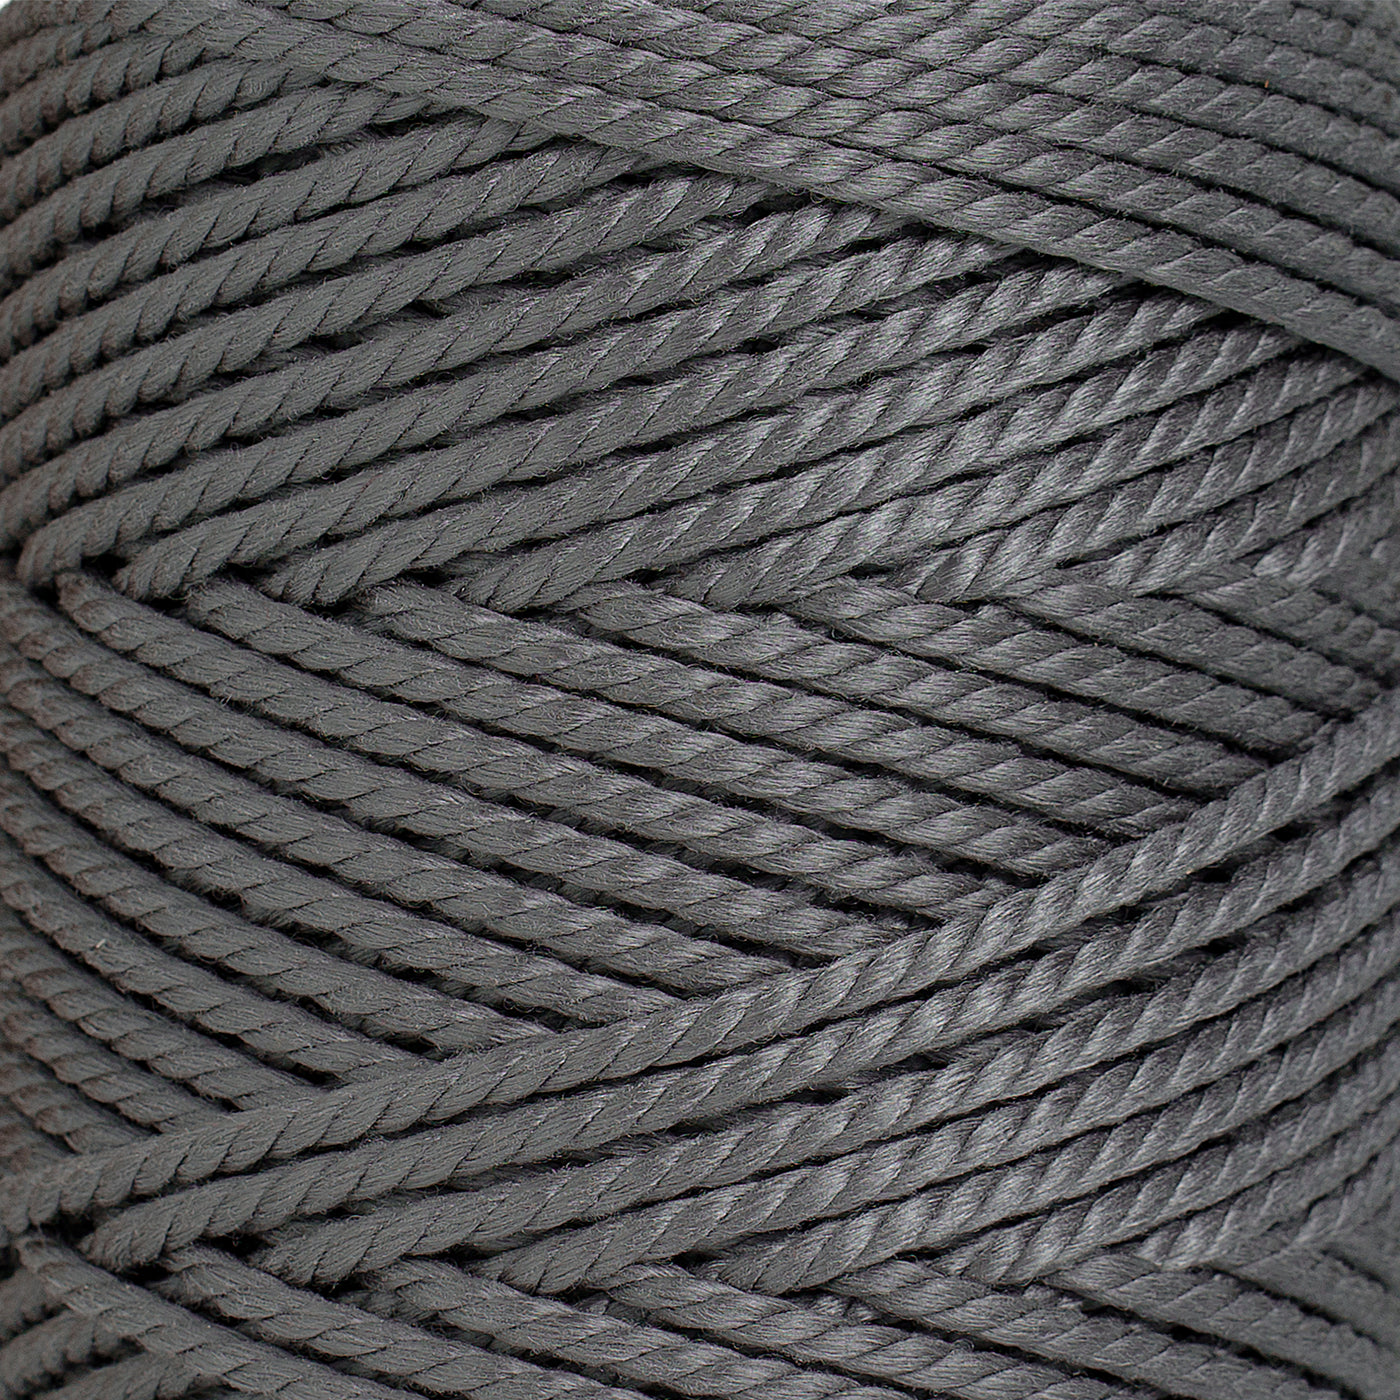 OUTDOOR RECYCLED CORD 3 MM - 3 PLY -  CHARCOAL GRAY COLOR